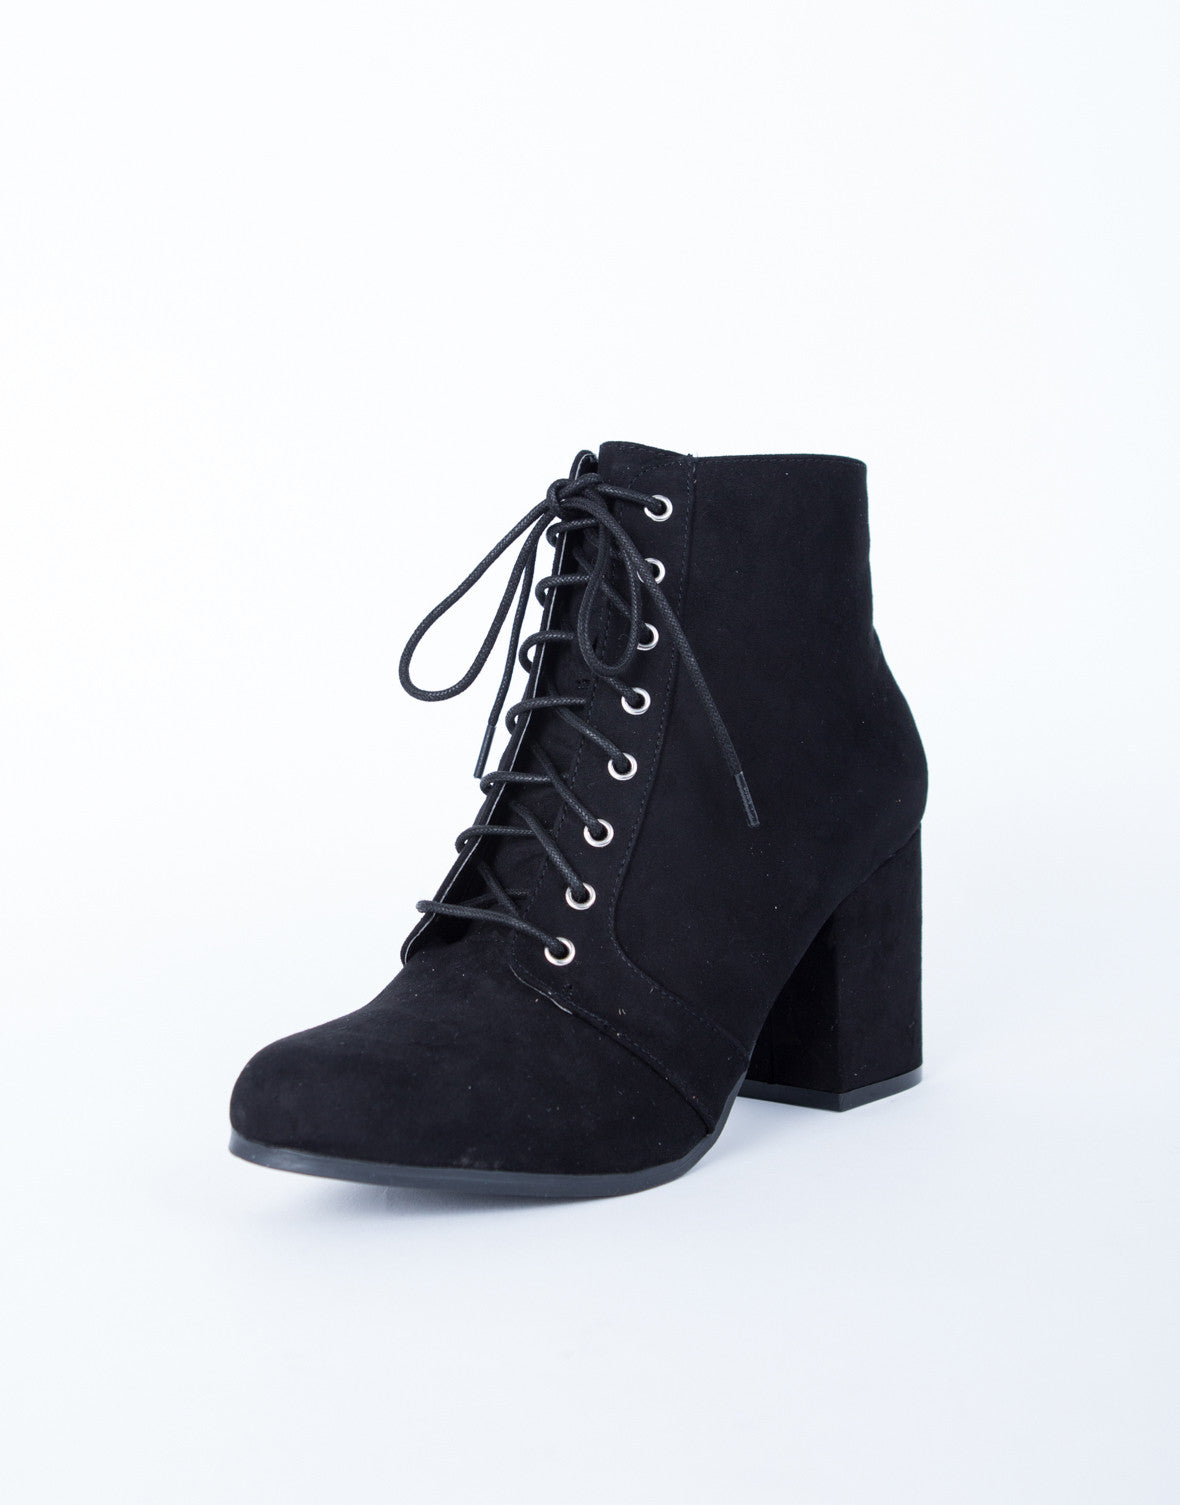 Lace-Up Suede Booties - Faux Suede Heel Boots - Chunky Heel Booties ...